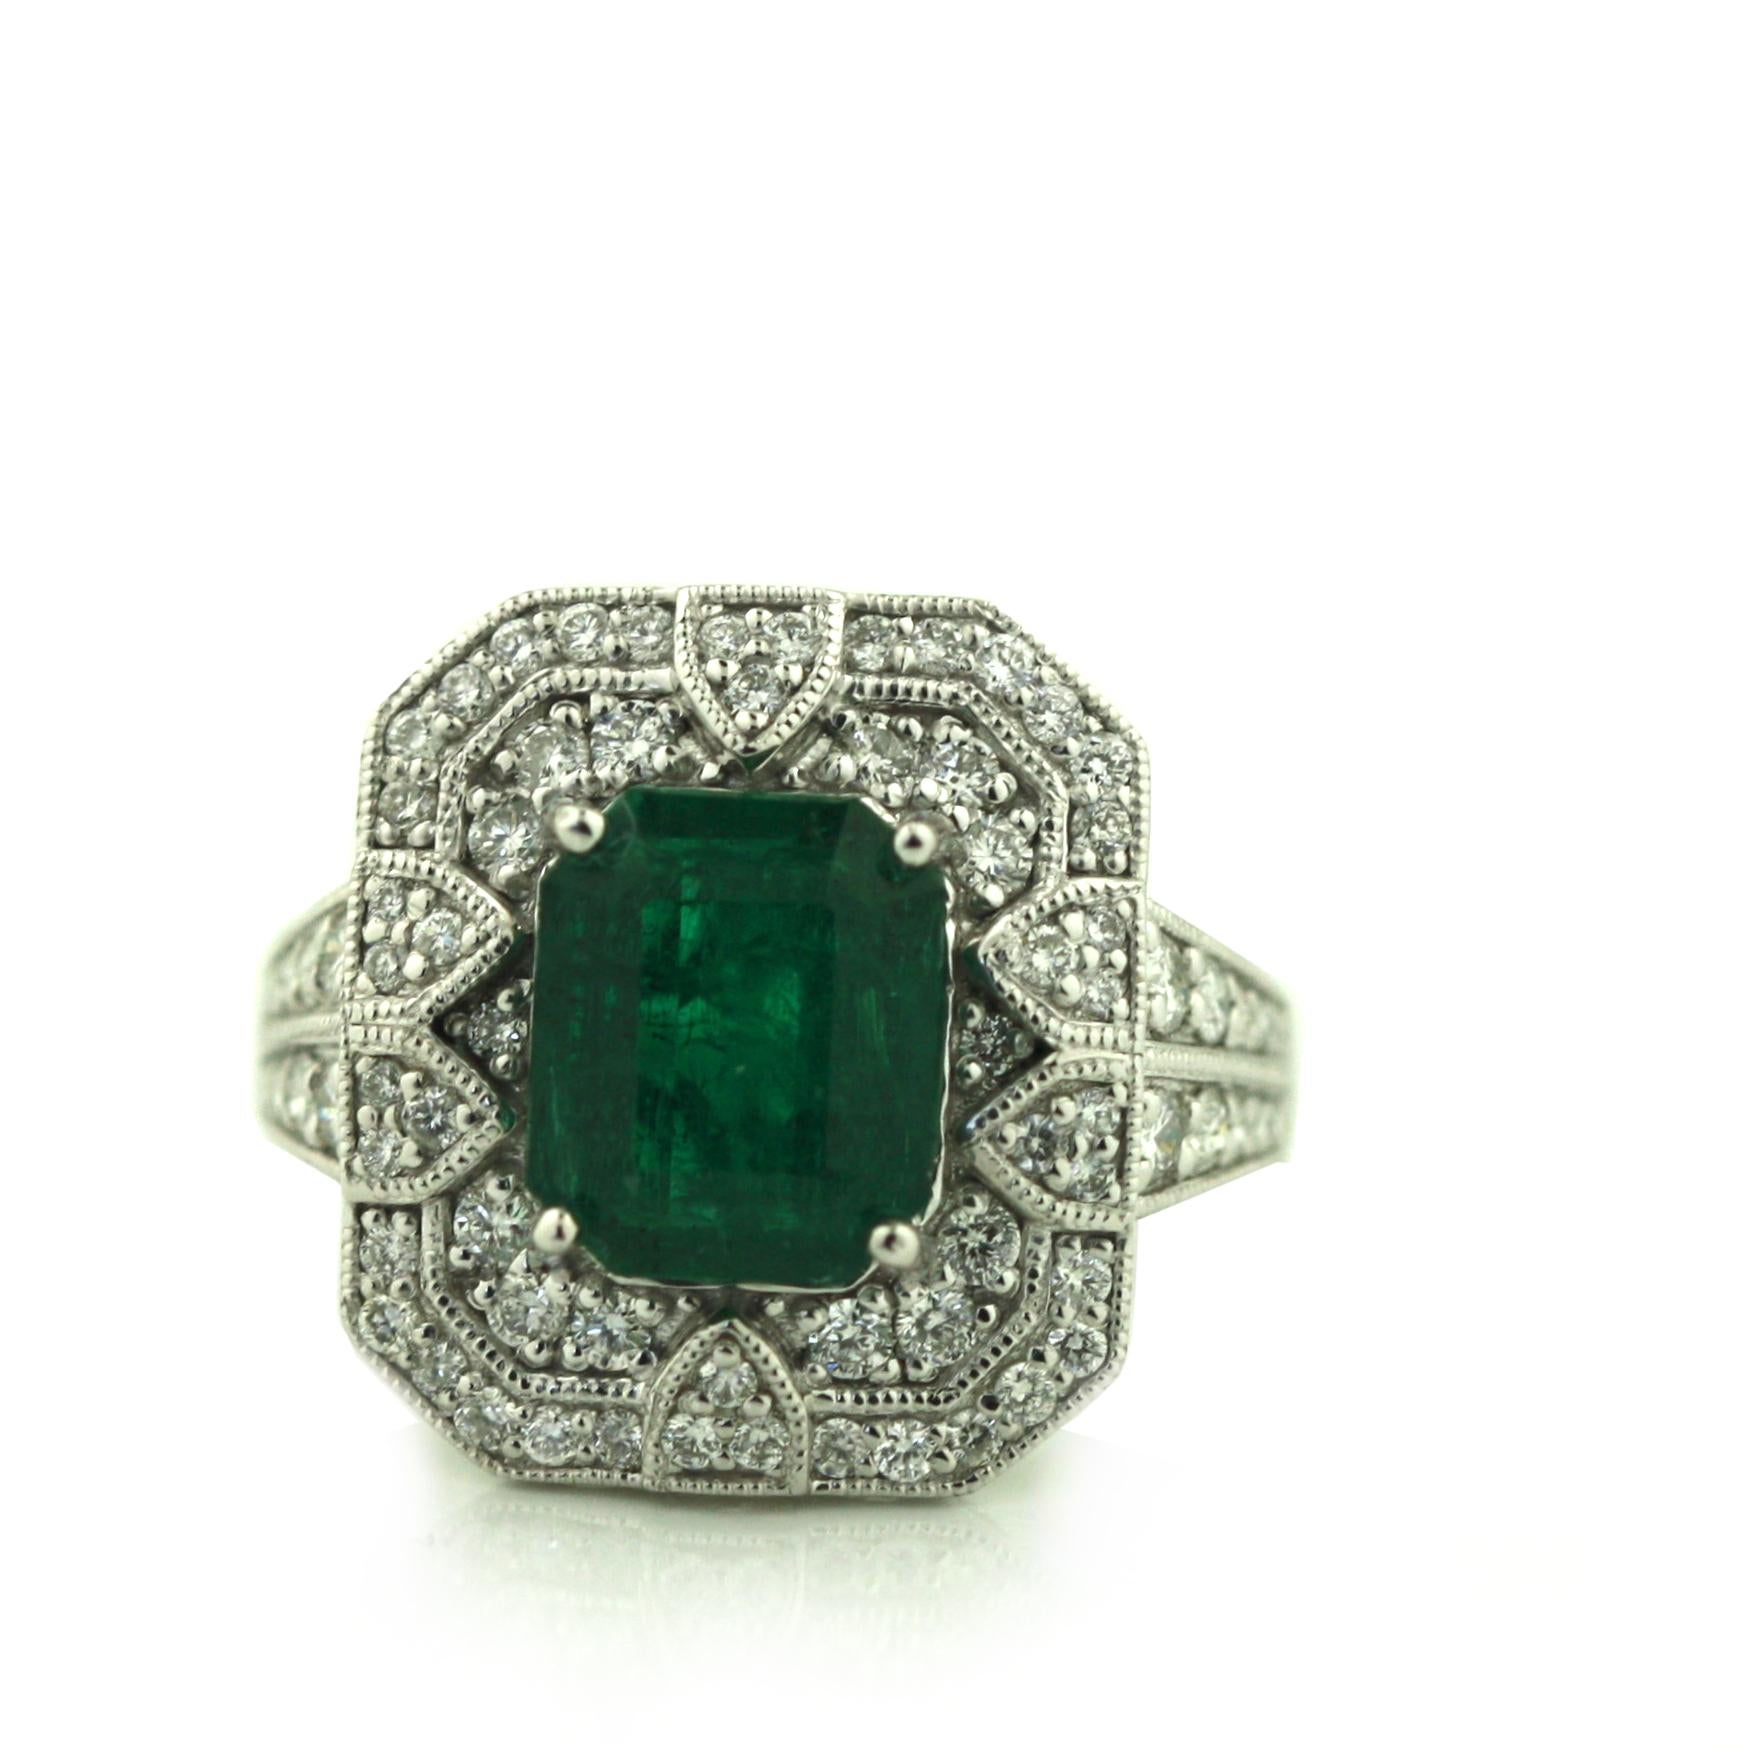 Platinum Emerald and Diamond Ring  
Designed as three tired rows, totaling approximately 8.11 carats 
Featuring a GIA certified, octagonal-shaped Emerald  
Weighing 3.50 carats  
Measuring 9.67 x 8.03 x 5.79 mm 
Ring Size 7 
Total Weight 10.3 grams 